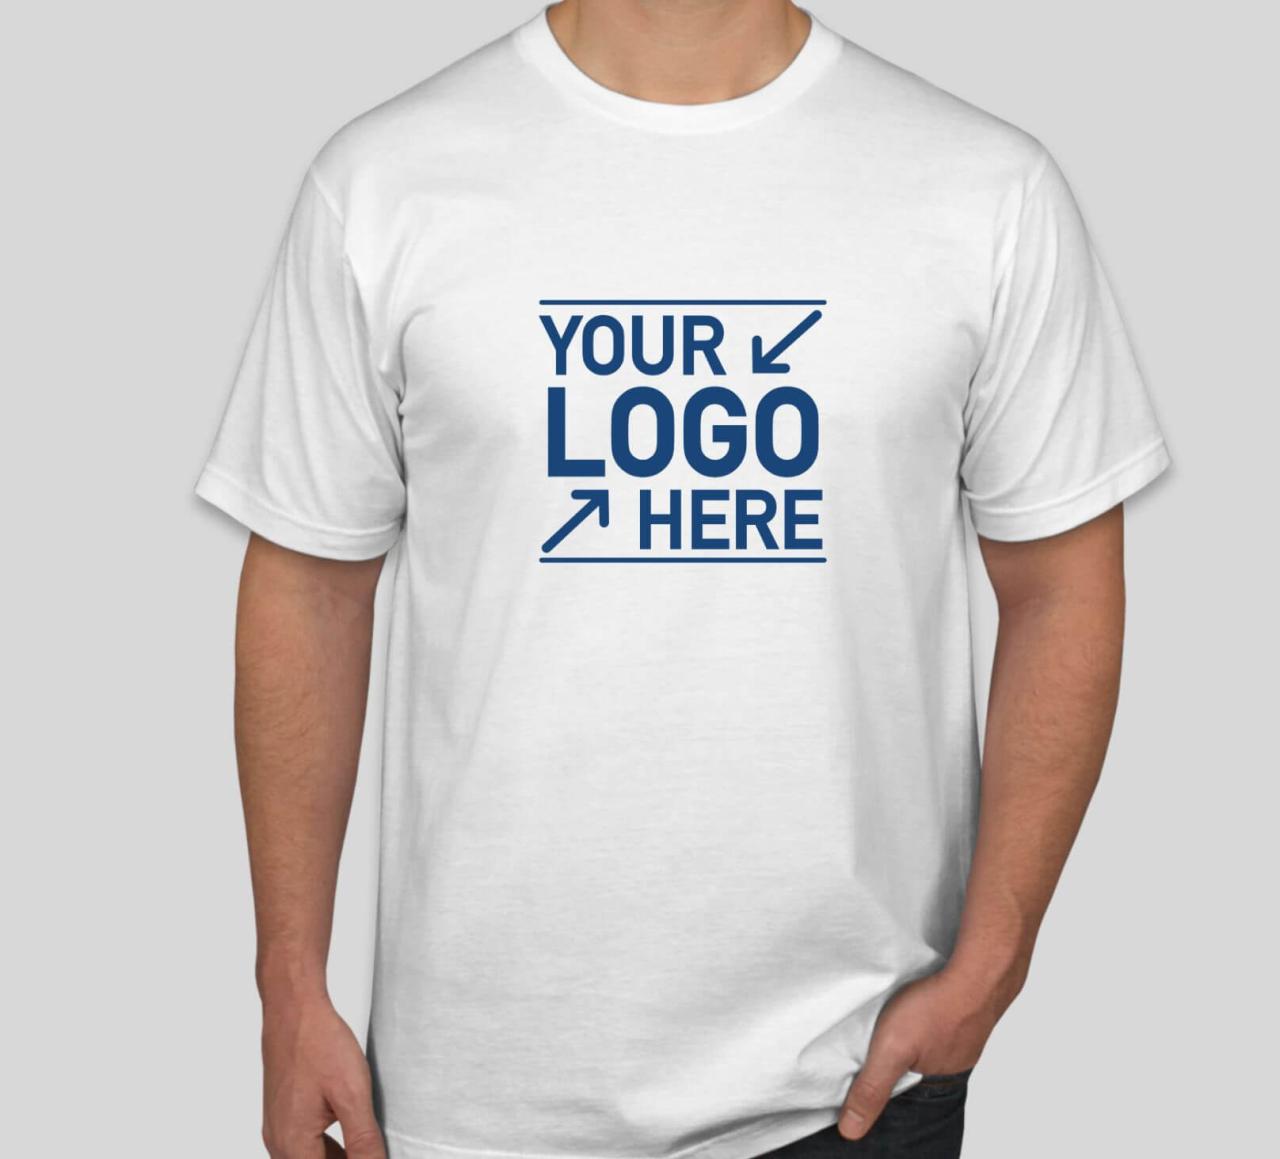 What Is The Best Custom T-shirt Website